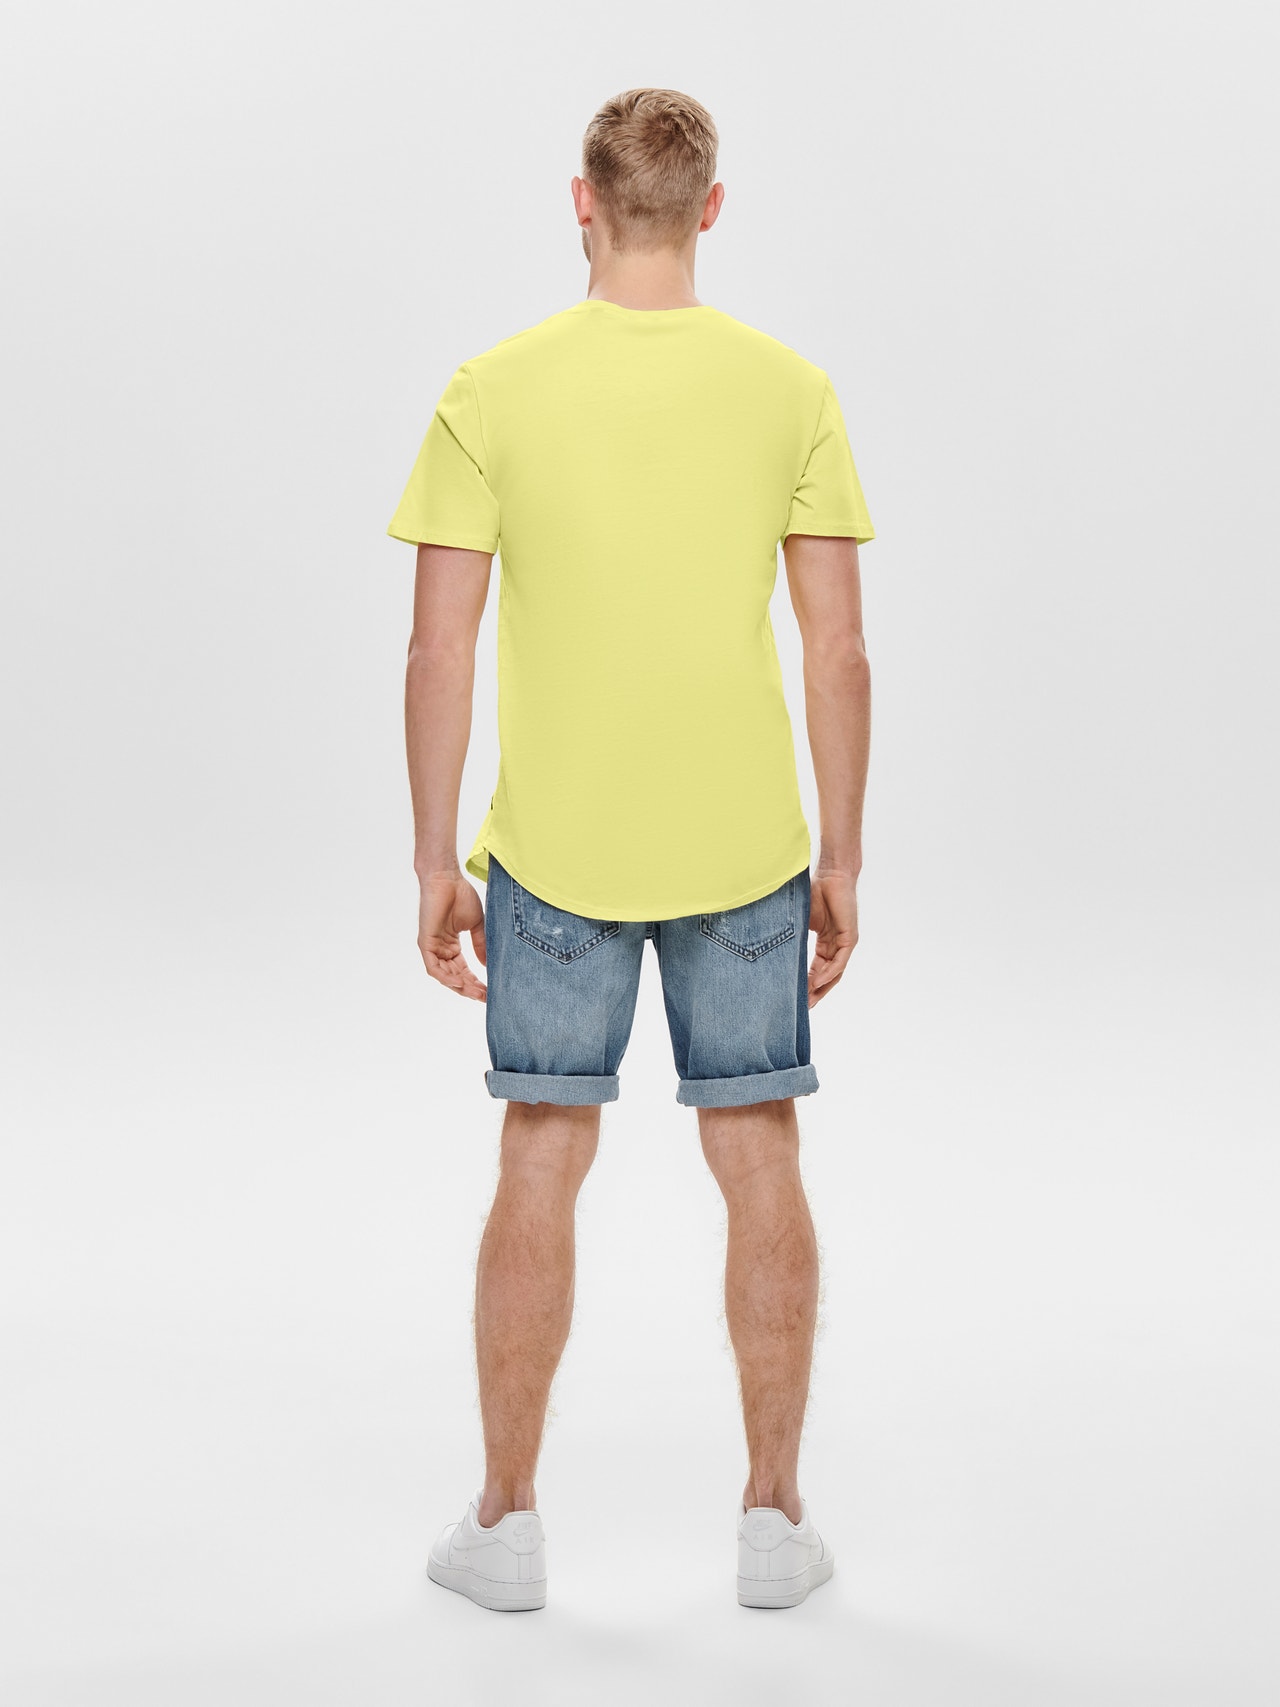 ONLY & SONS Long Line Fit Round Neck T-Shirt -Mellow Yellow - 22002973